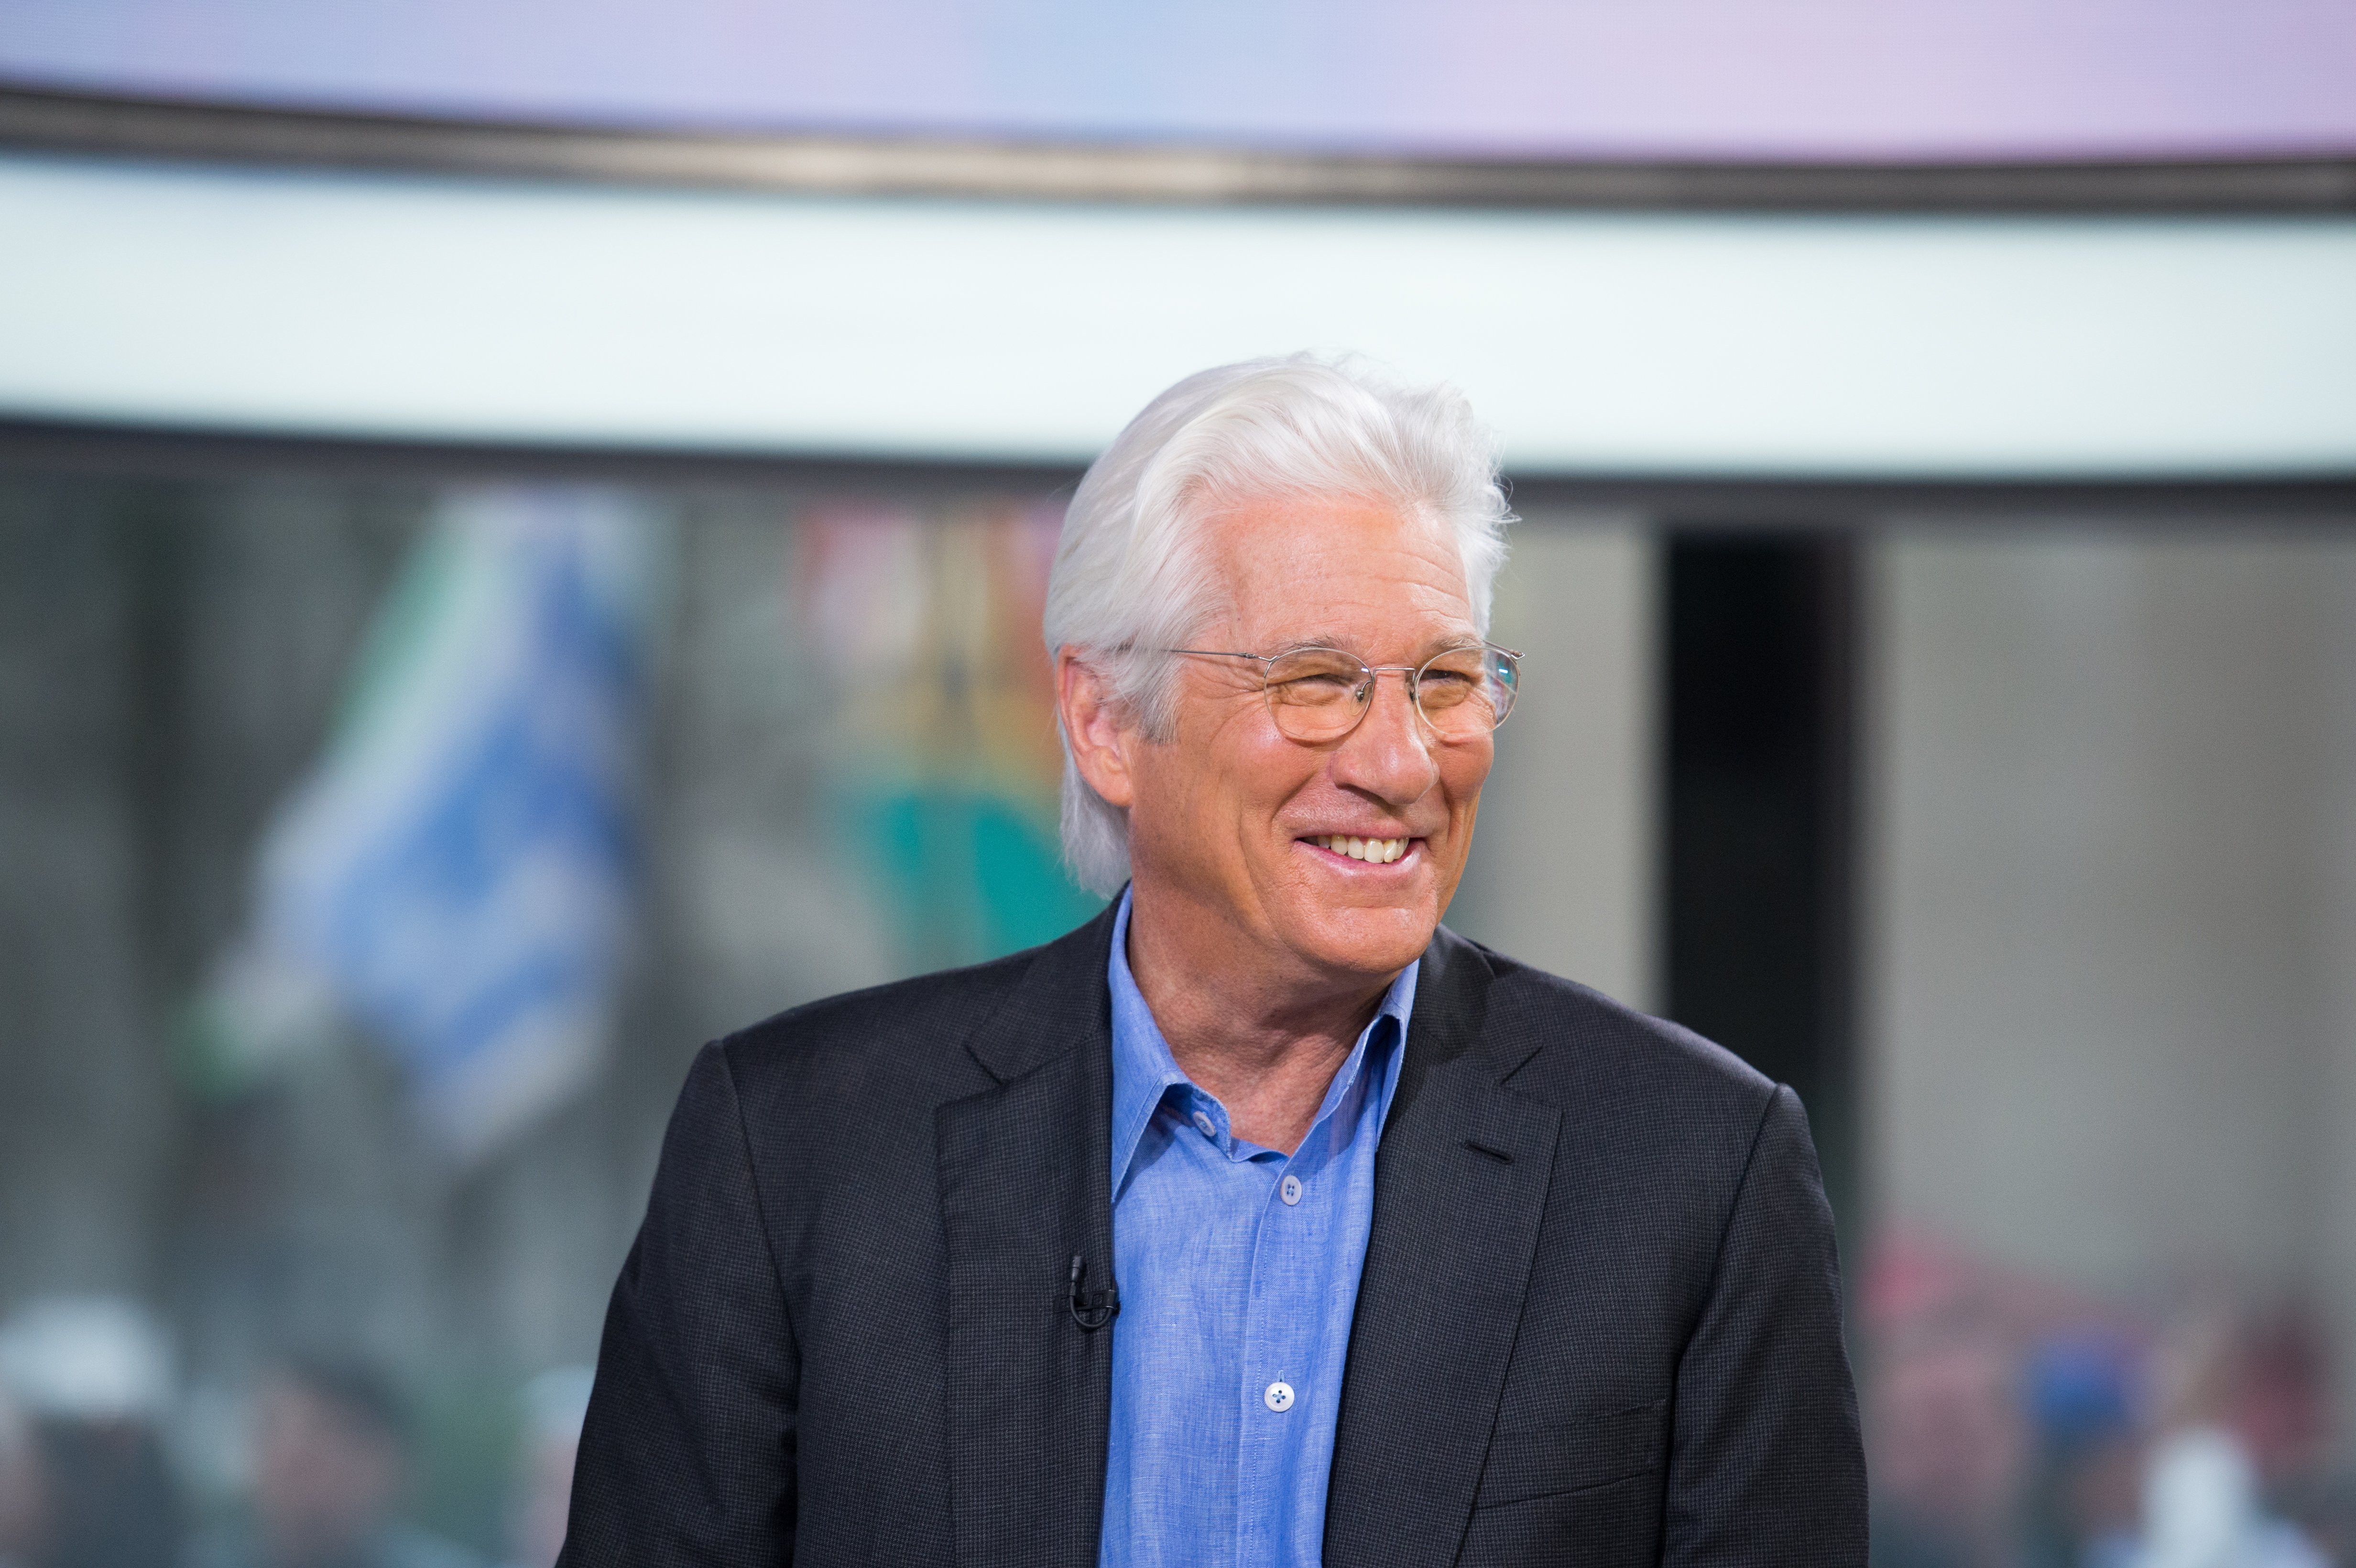 Richard Gere on the "Today" show to talk about his film "Norman: The Moderate Rise and Tragic Fall of a New York Repairman" on April 13, 2017. |  Source: Getty Images